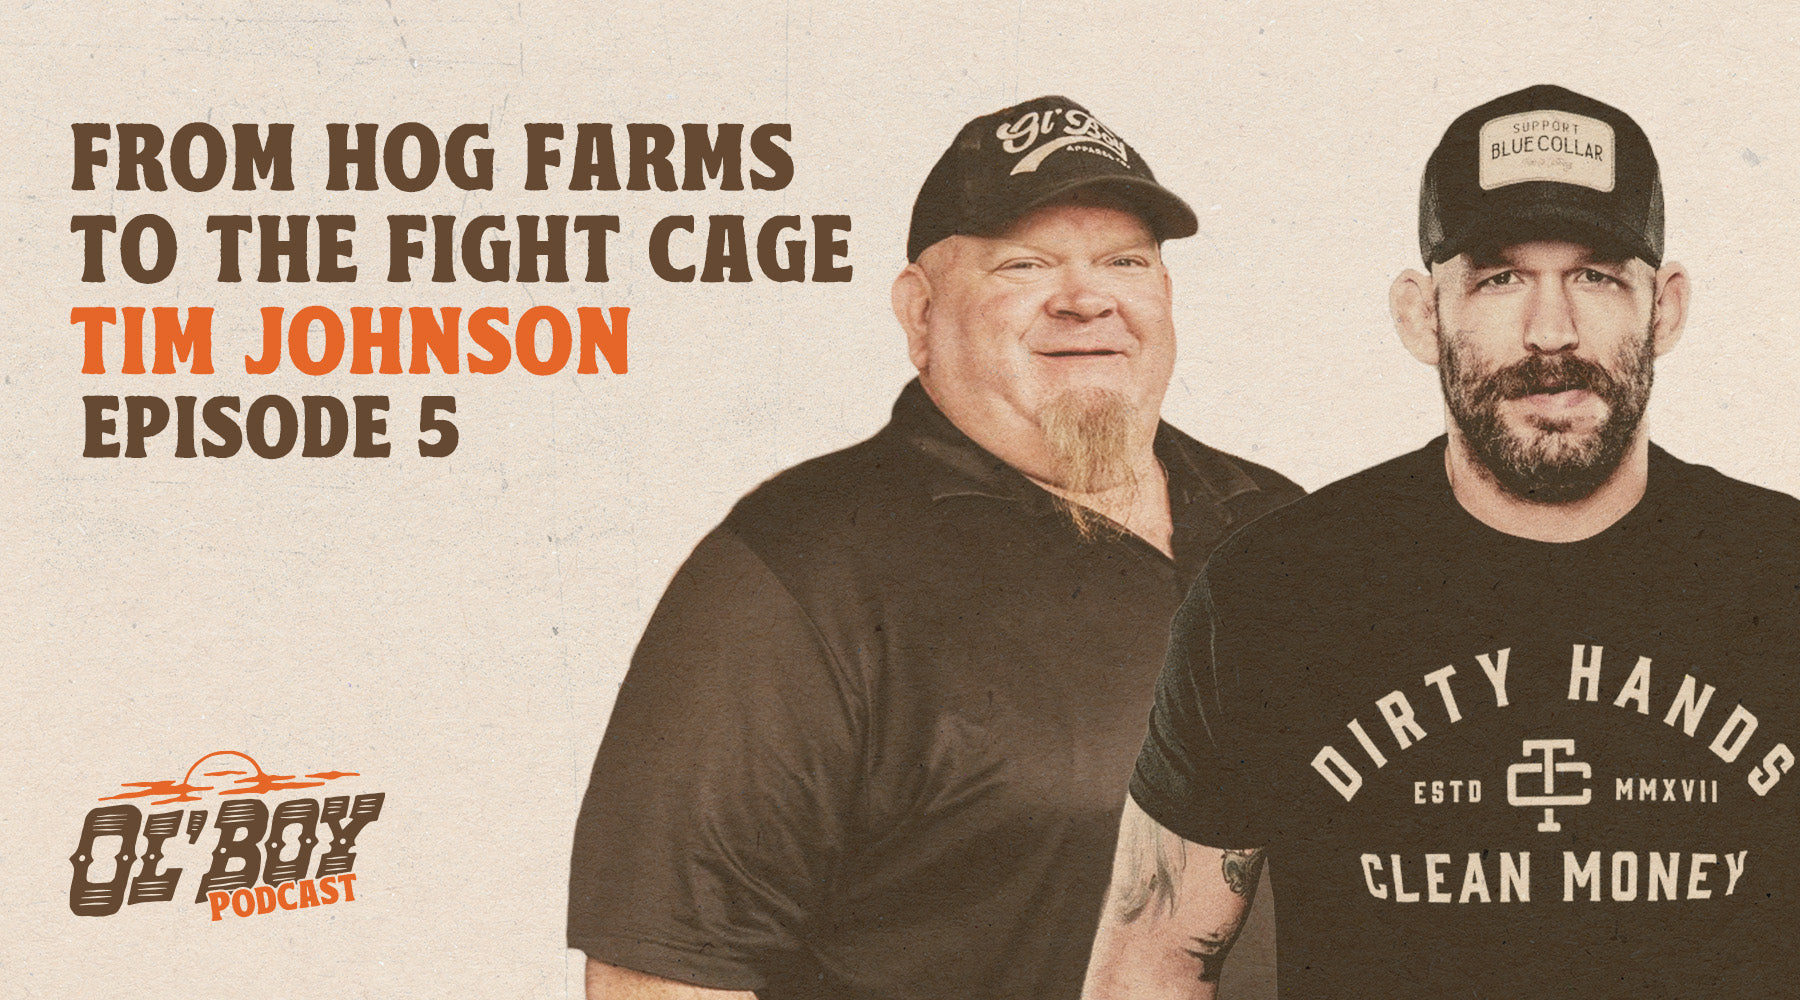 Episode 5 - Tim Johnson: From Hog Farms to the Fight Cage